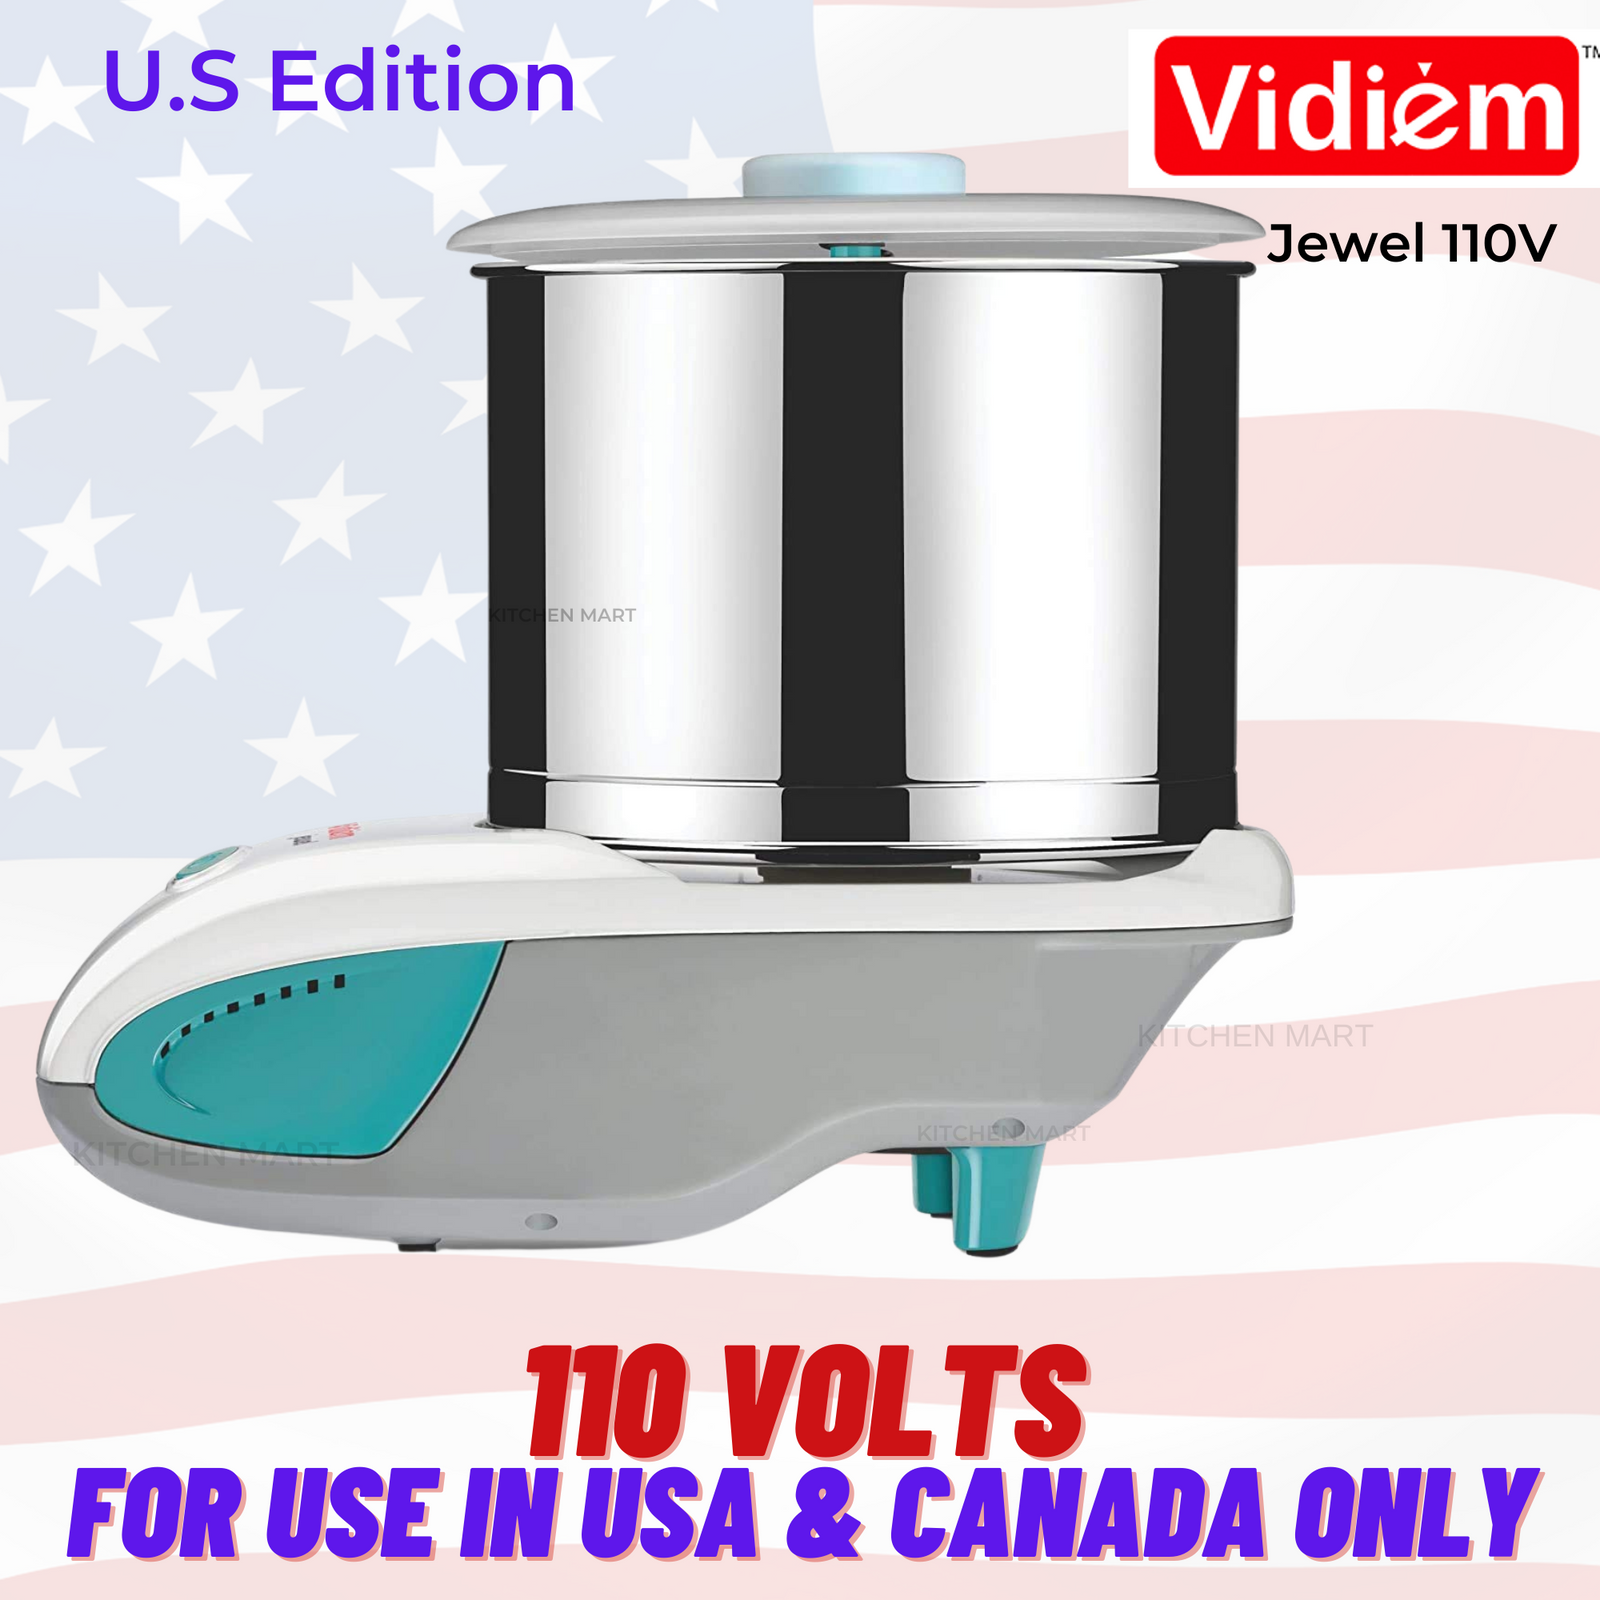 Vidiem Jewel Wet Grinder 110Volts for use in USA & CAnada Only